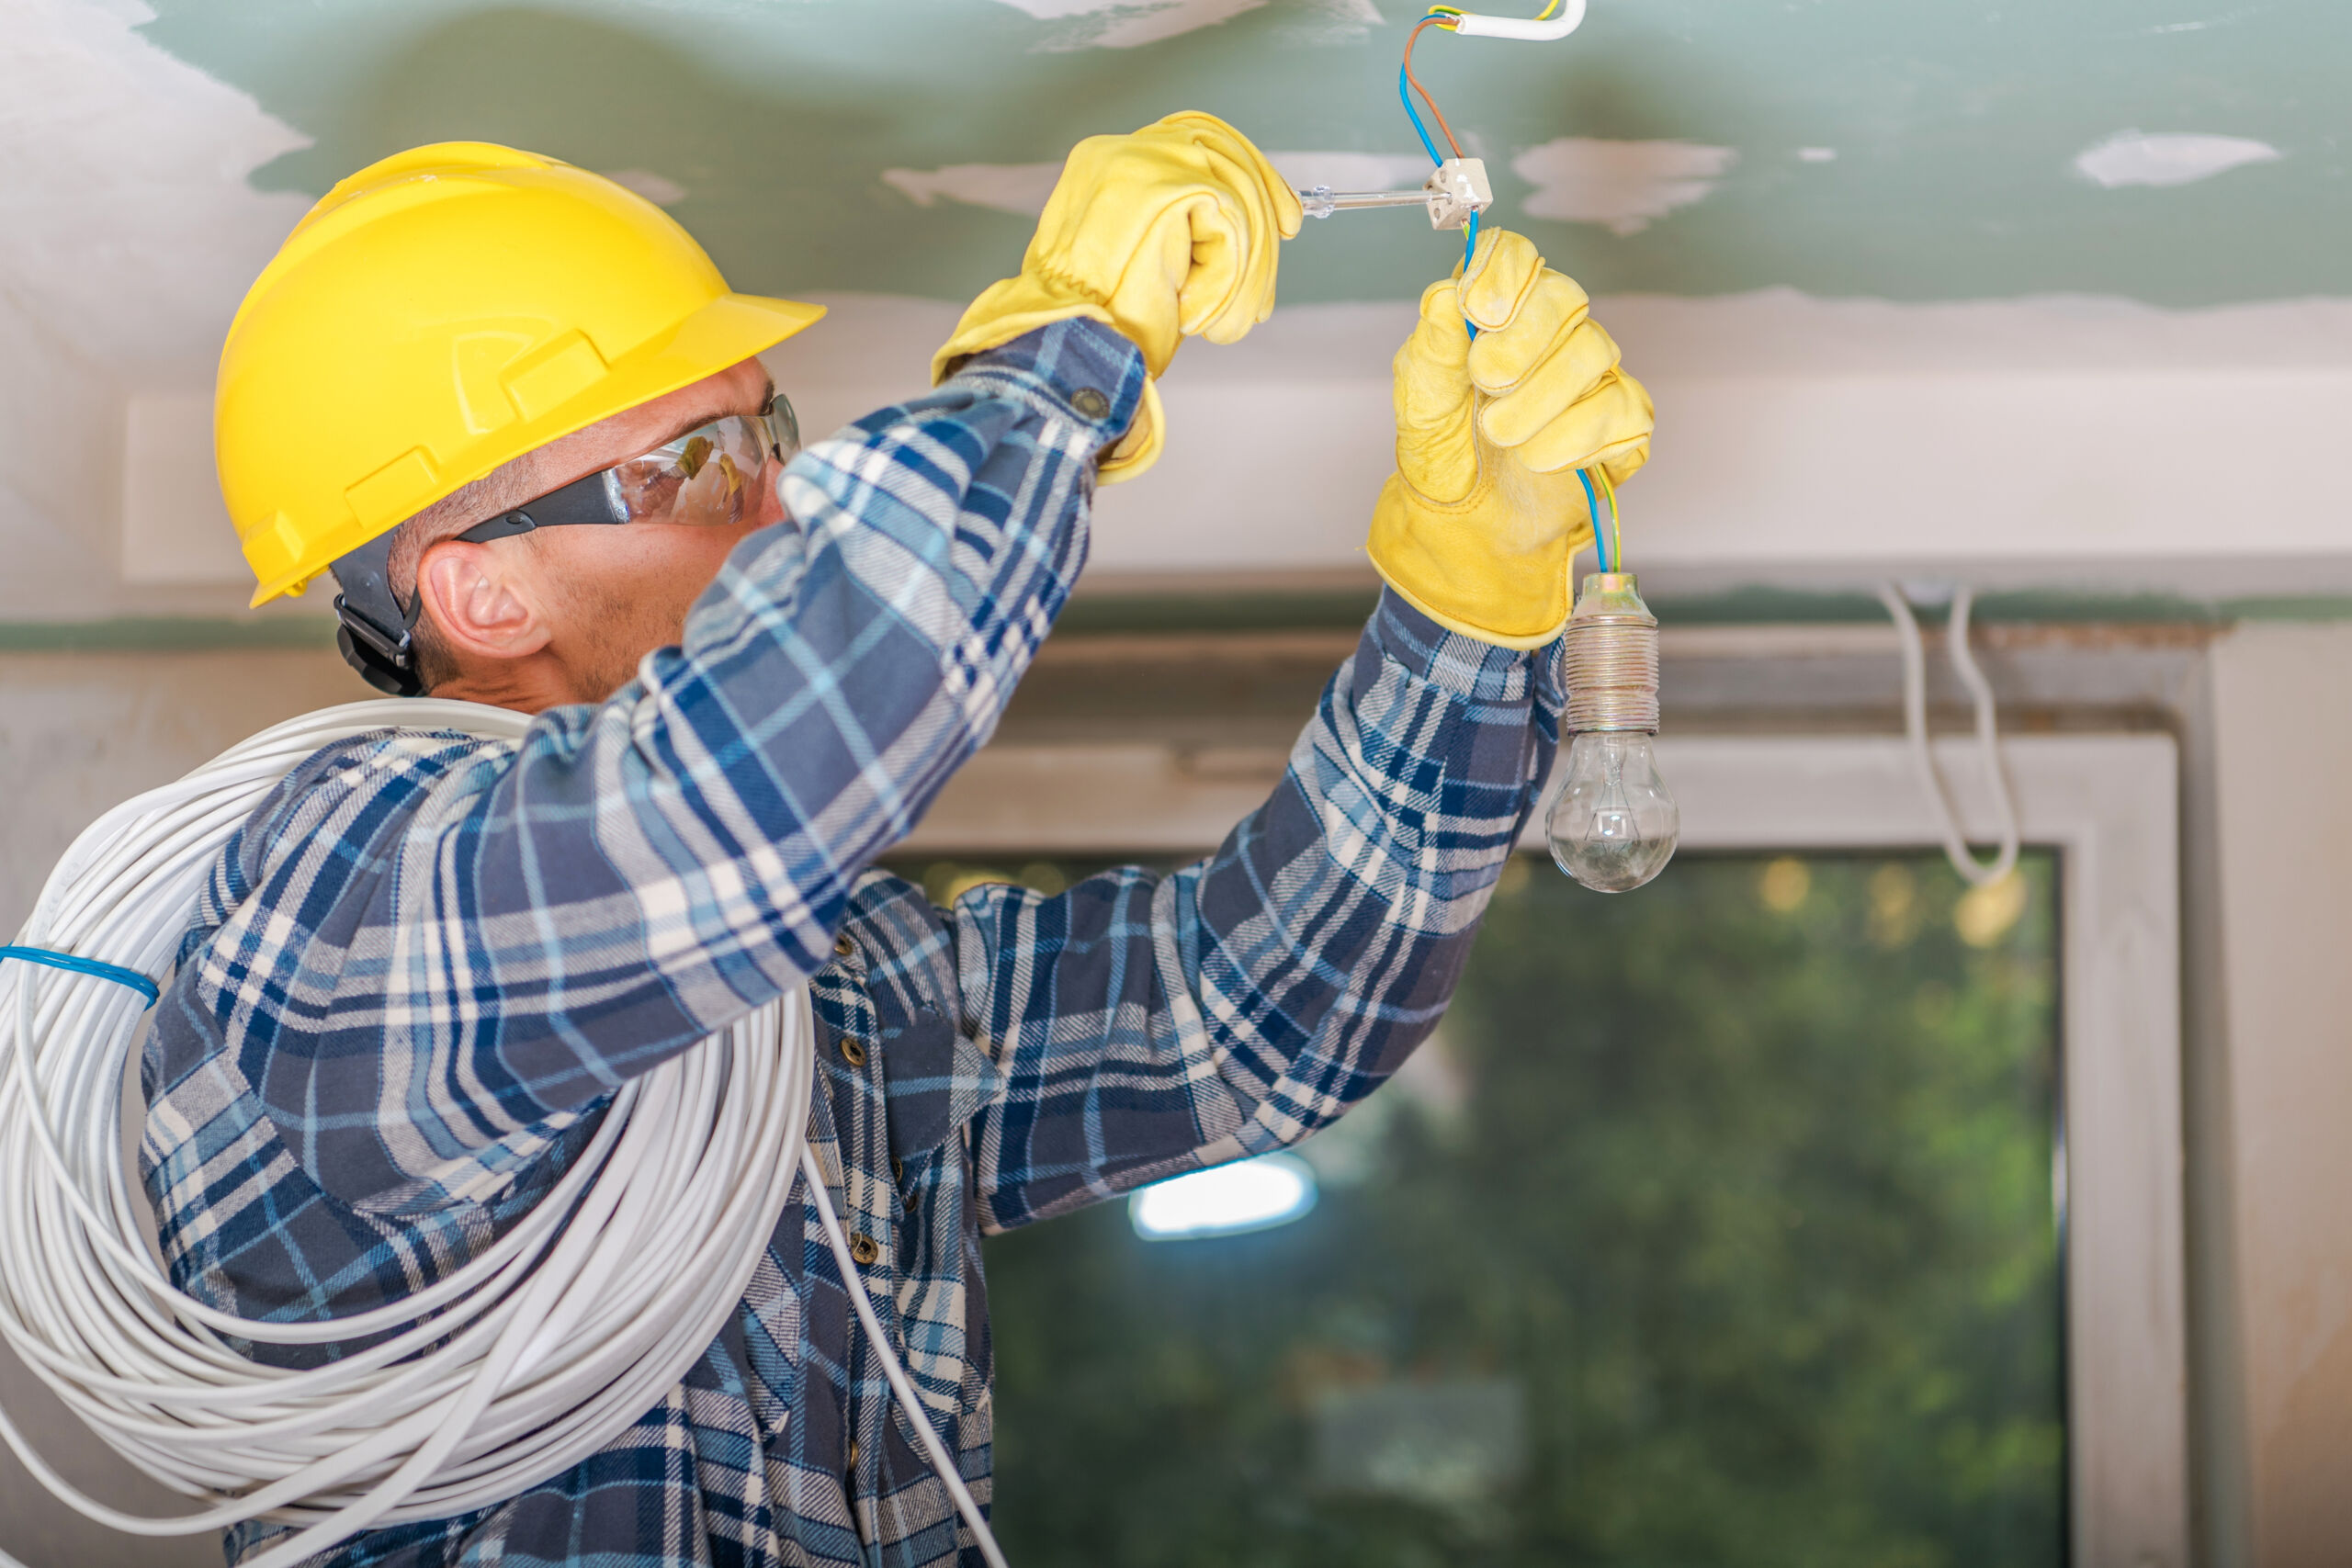 Commercial wiring methods: Back to basics